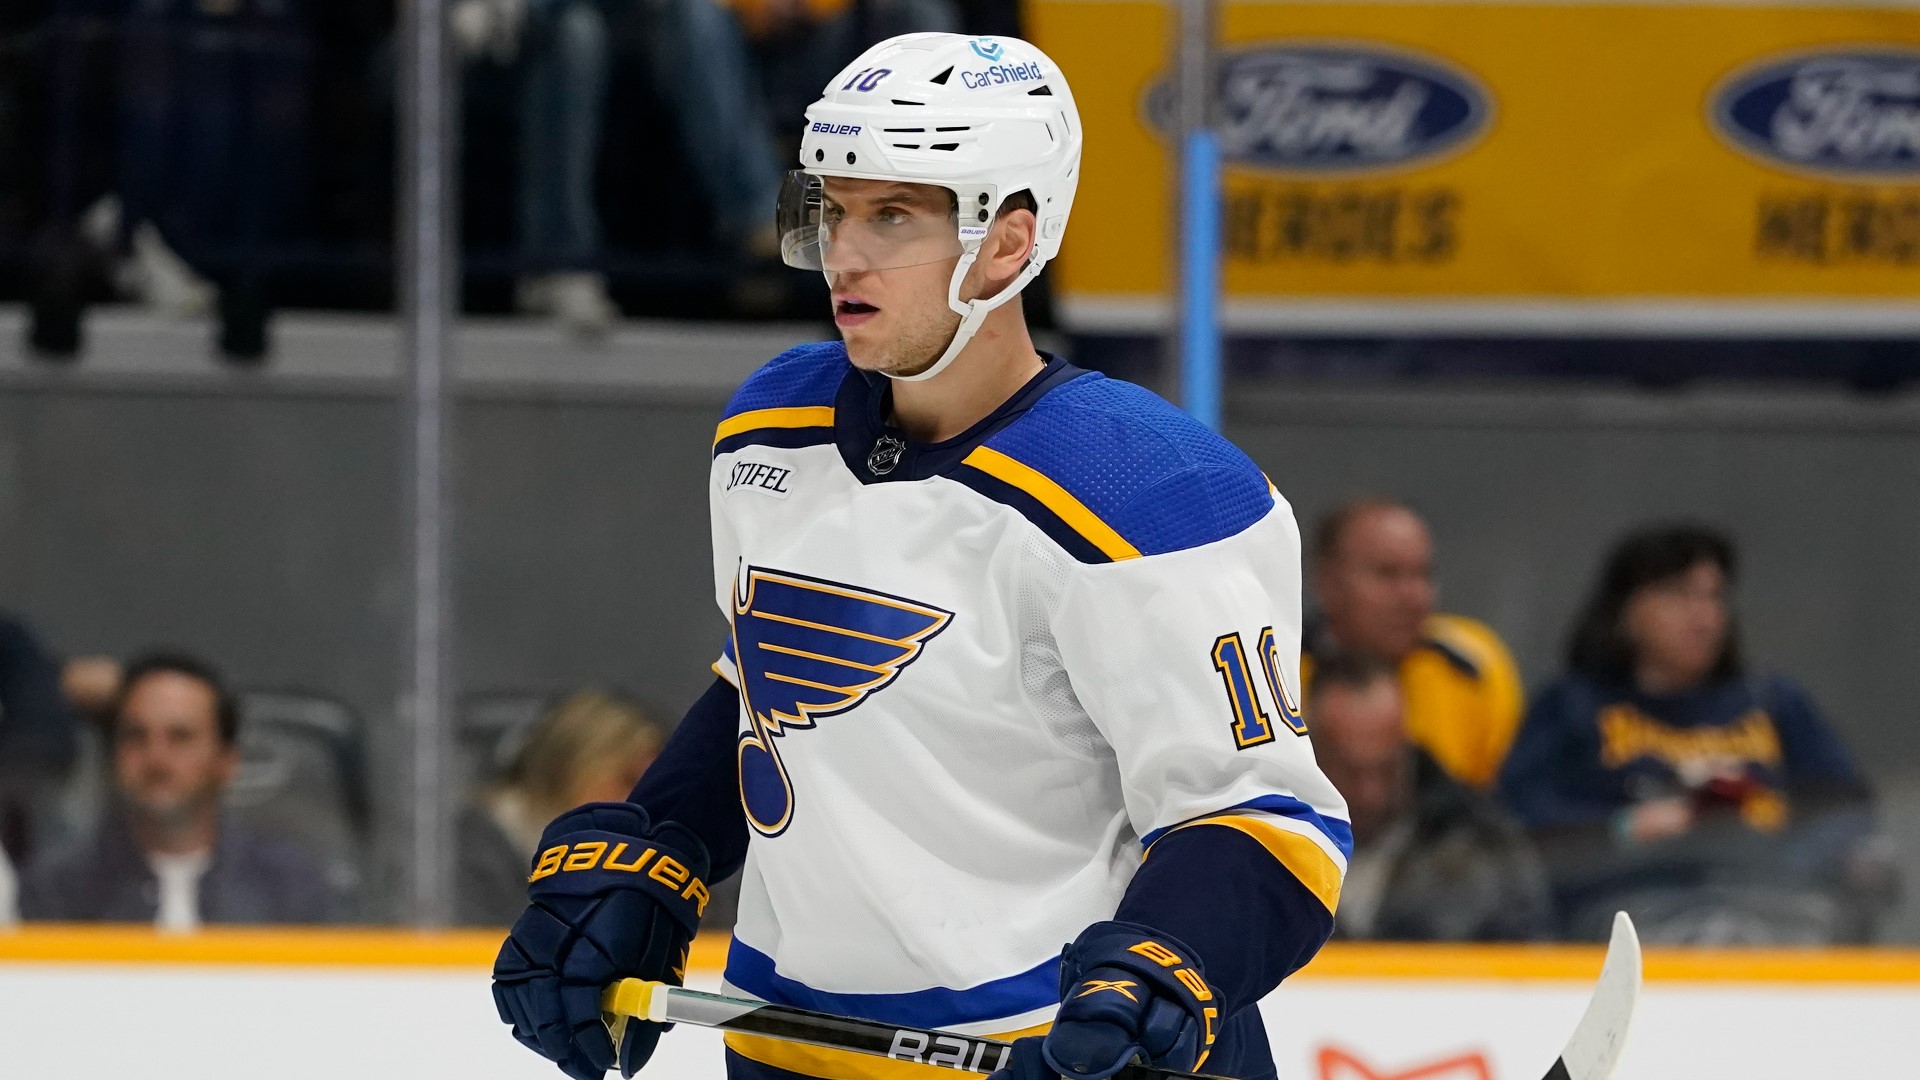 Brayden Schenn has been named the captain of the Blues for the 2023-24 NHL season. The team made the announcement on Tuesday ahead of training camp beginning on Sept